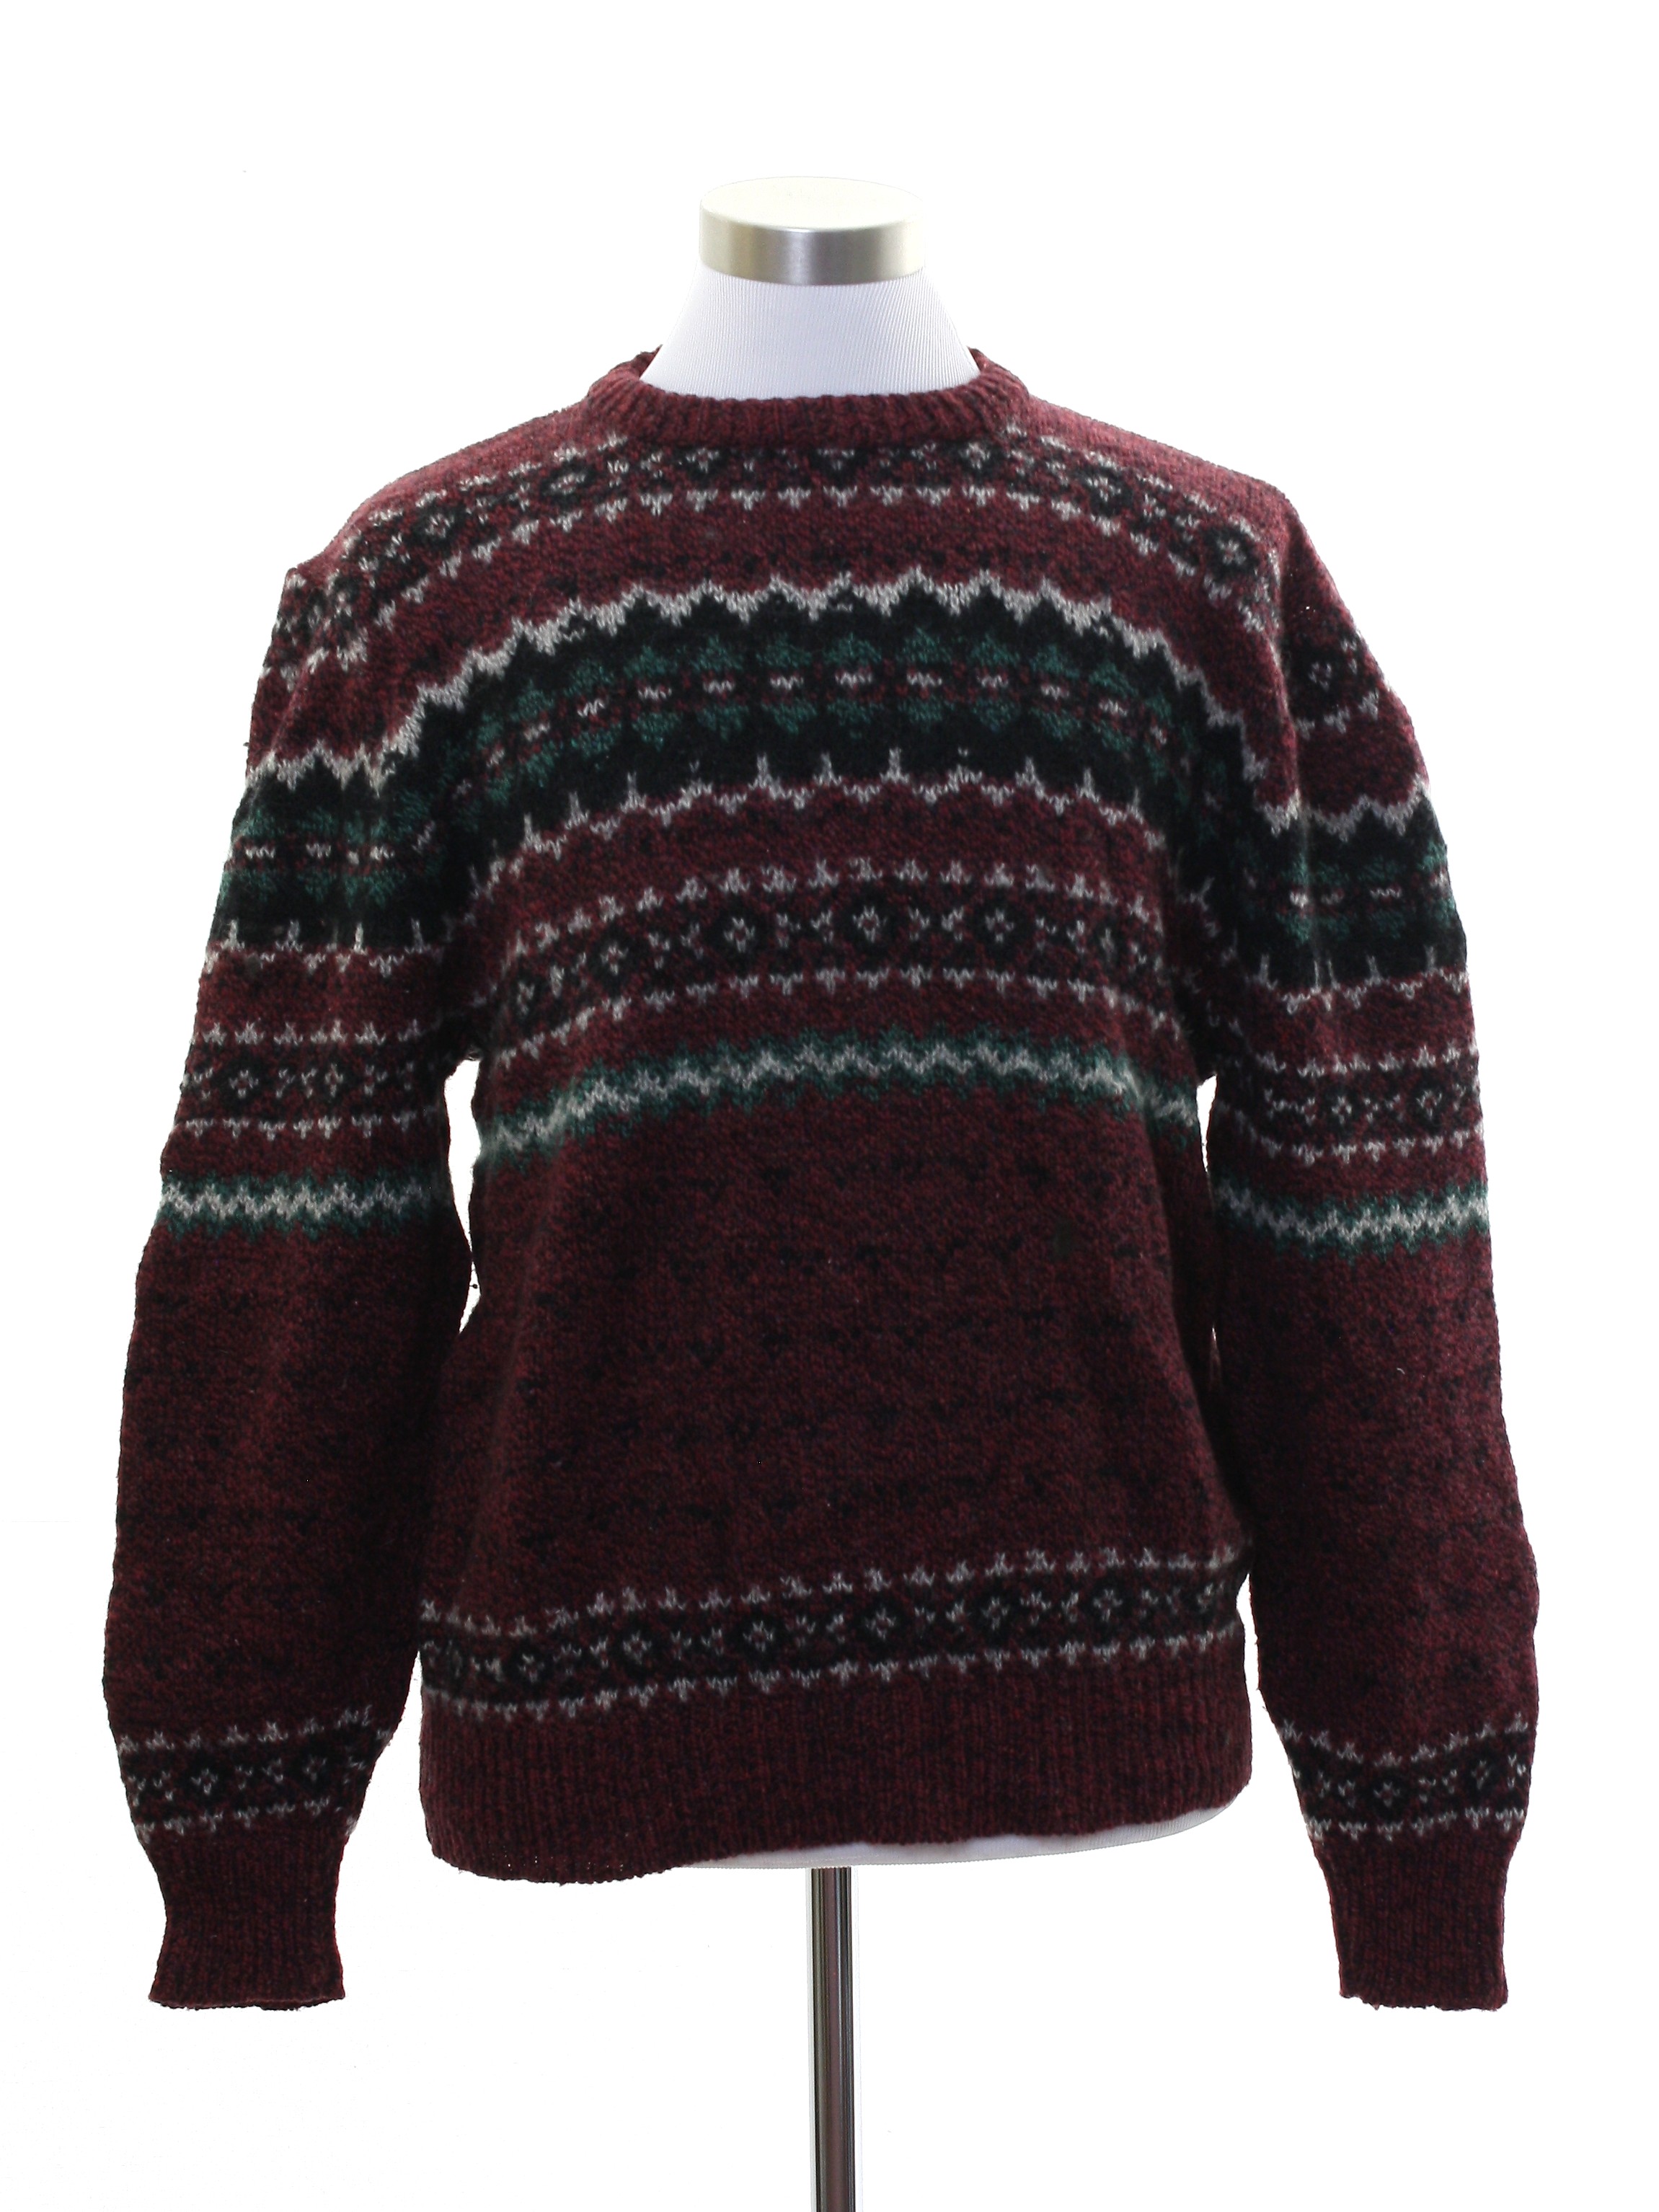 Nineties Vintage Sweater: Late 90s -Royal North Mills Outfitters- Mens ...